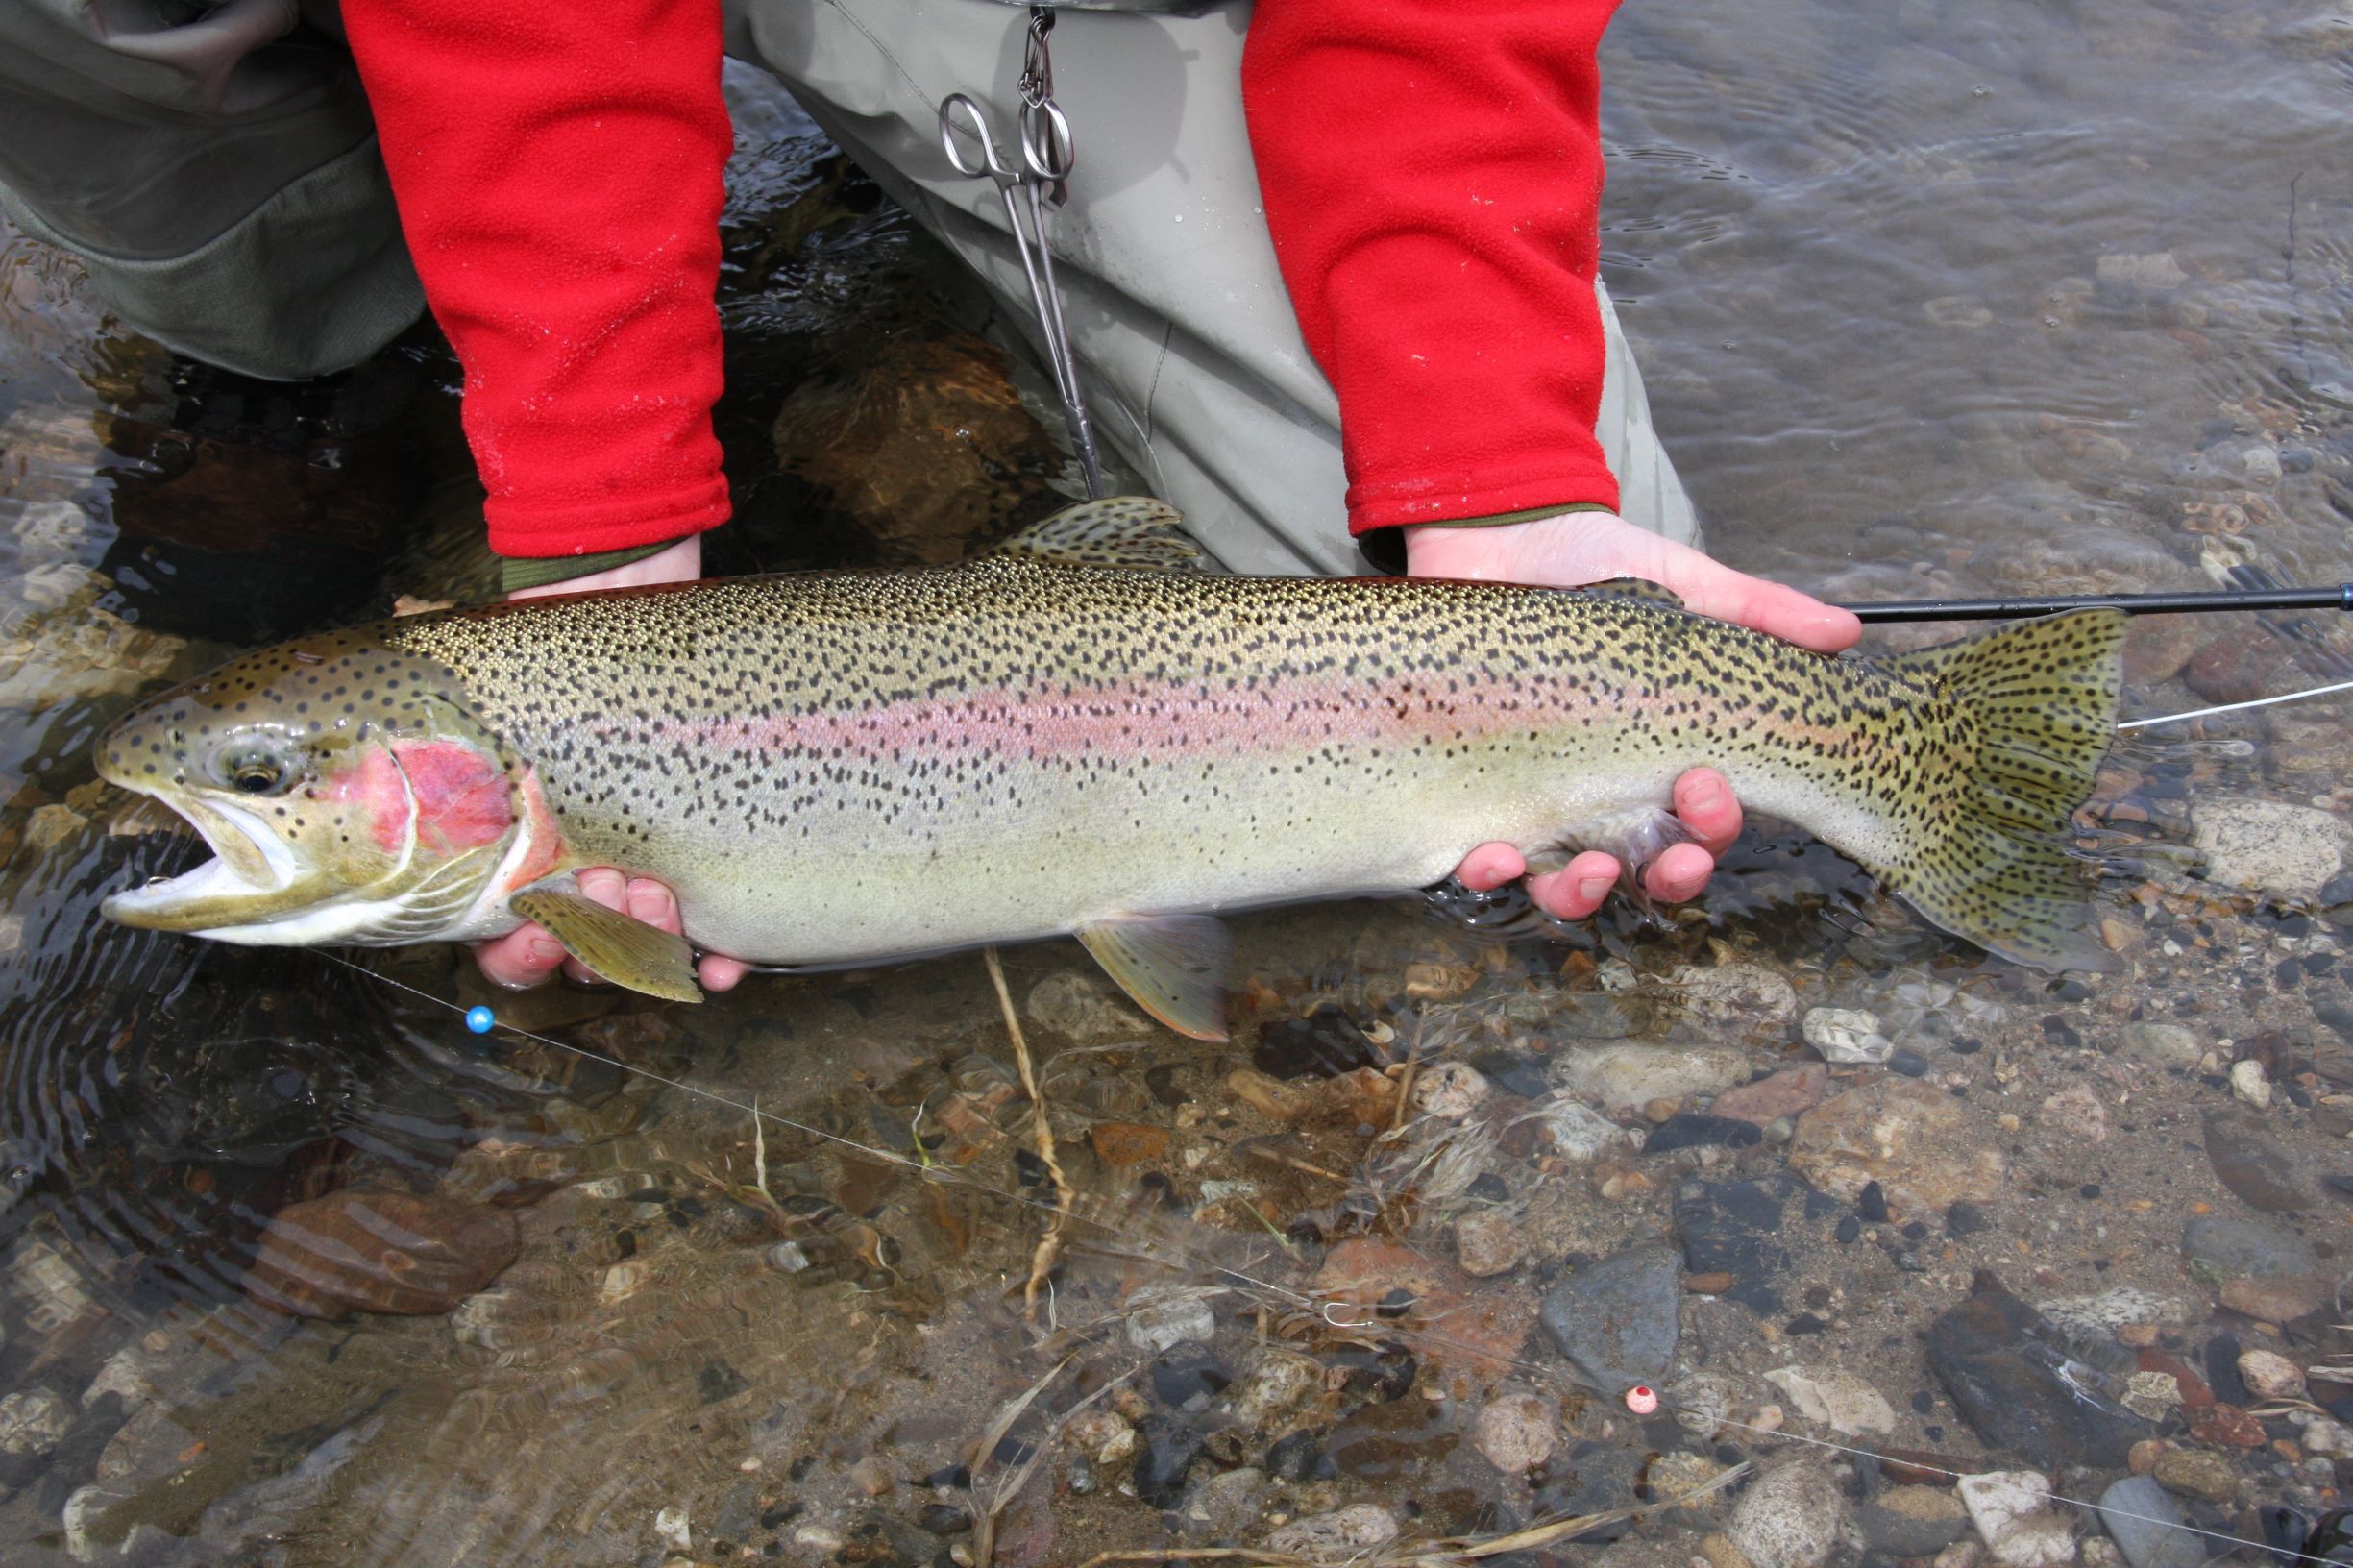 An Alaskan angler holds a nice sized rainbow trout while kneeling in the water.